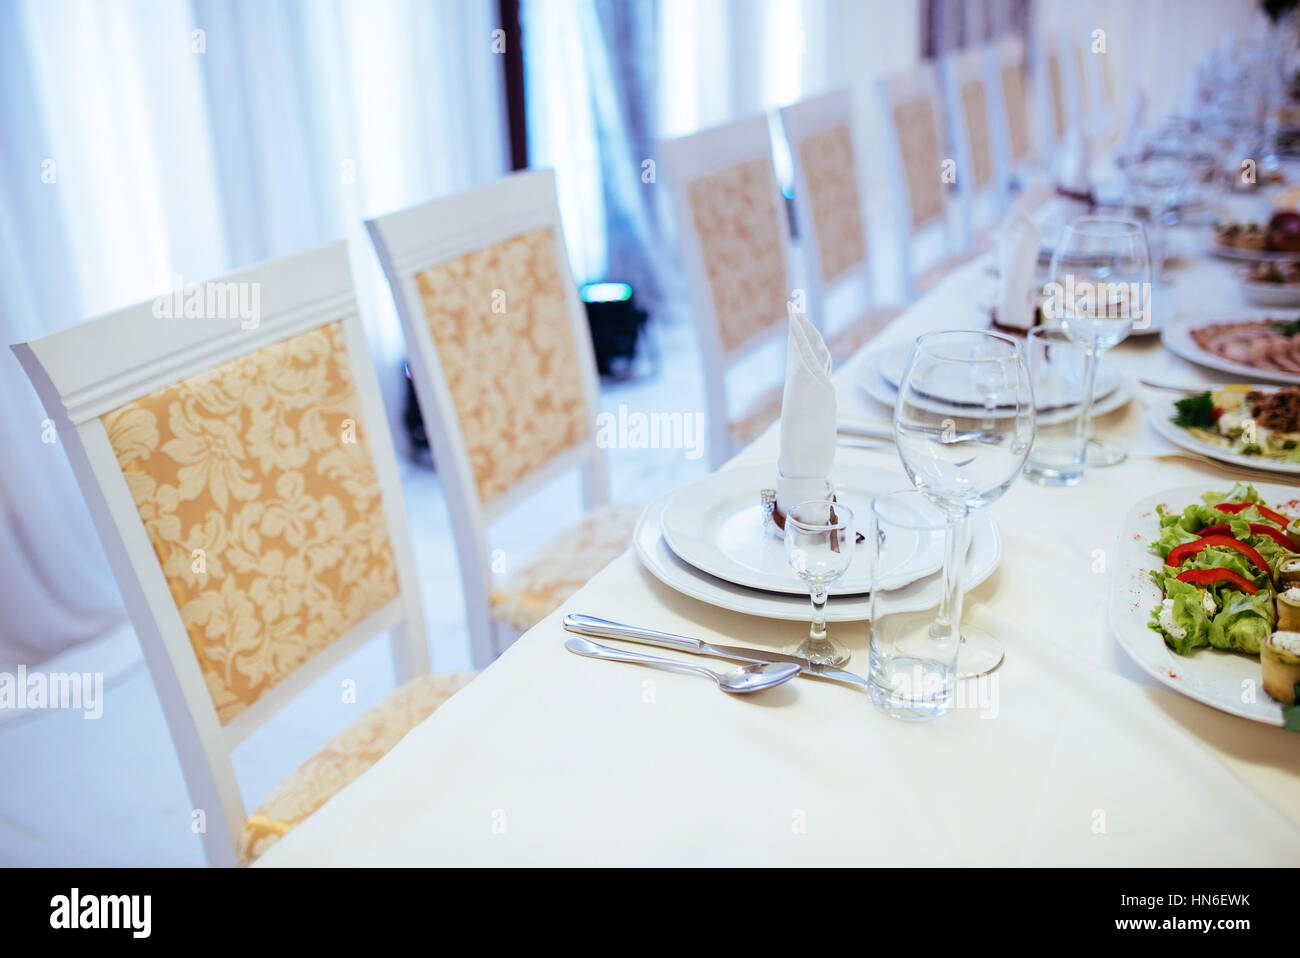 Formal stylish setting on a dinner table with elegant glassware Stock Photo